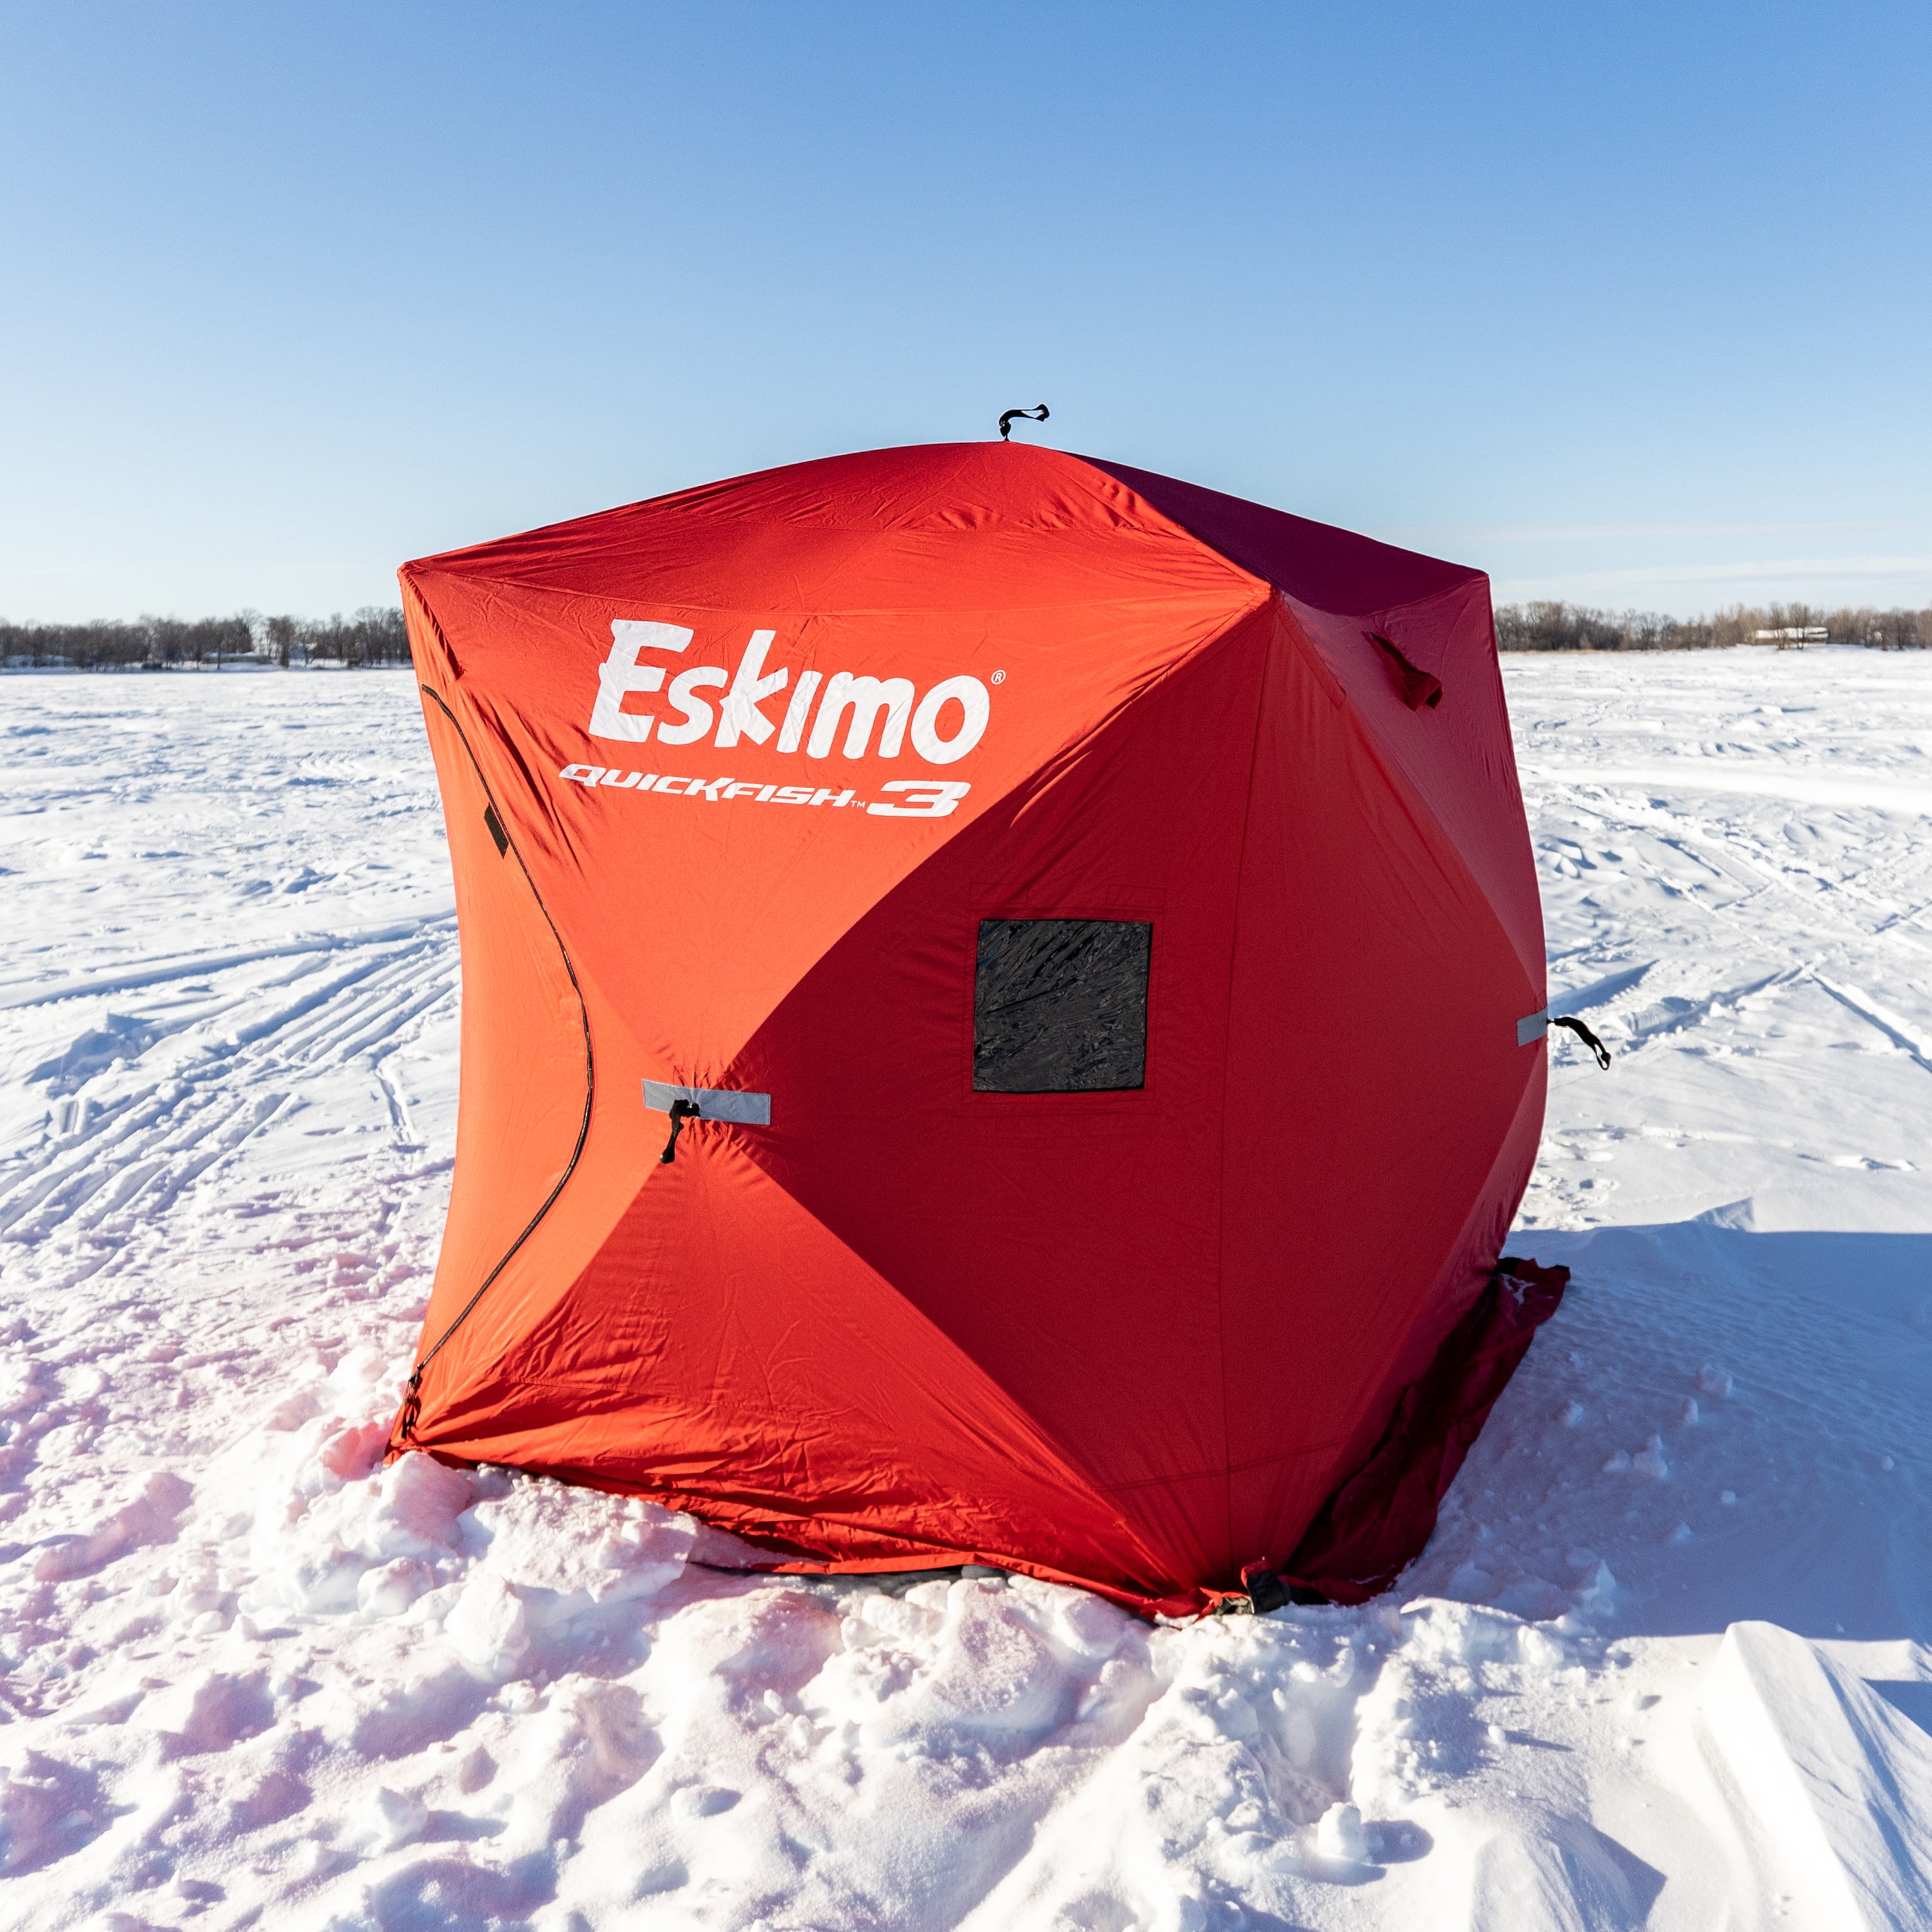 Eskimo Wide 1 XR Thermal, Sled Shelter, Insulated, Red/Black, 1